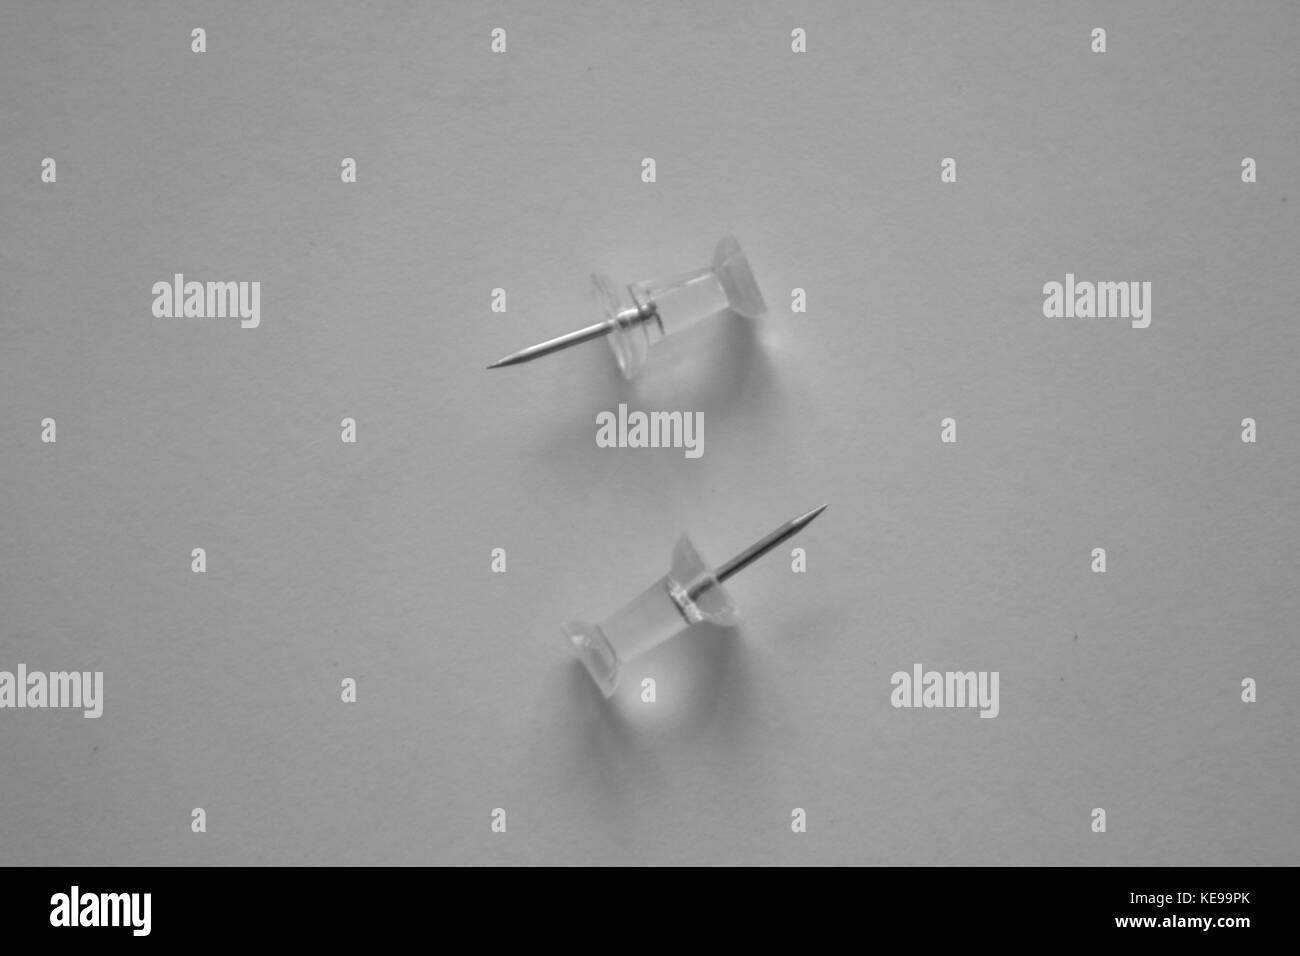 Two clear pushpins facing opposite directions. Stock Photo